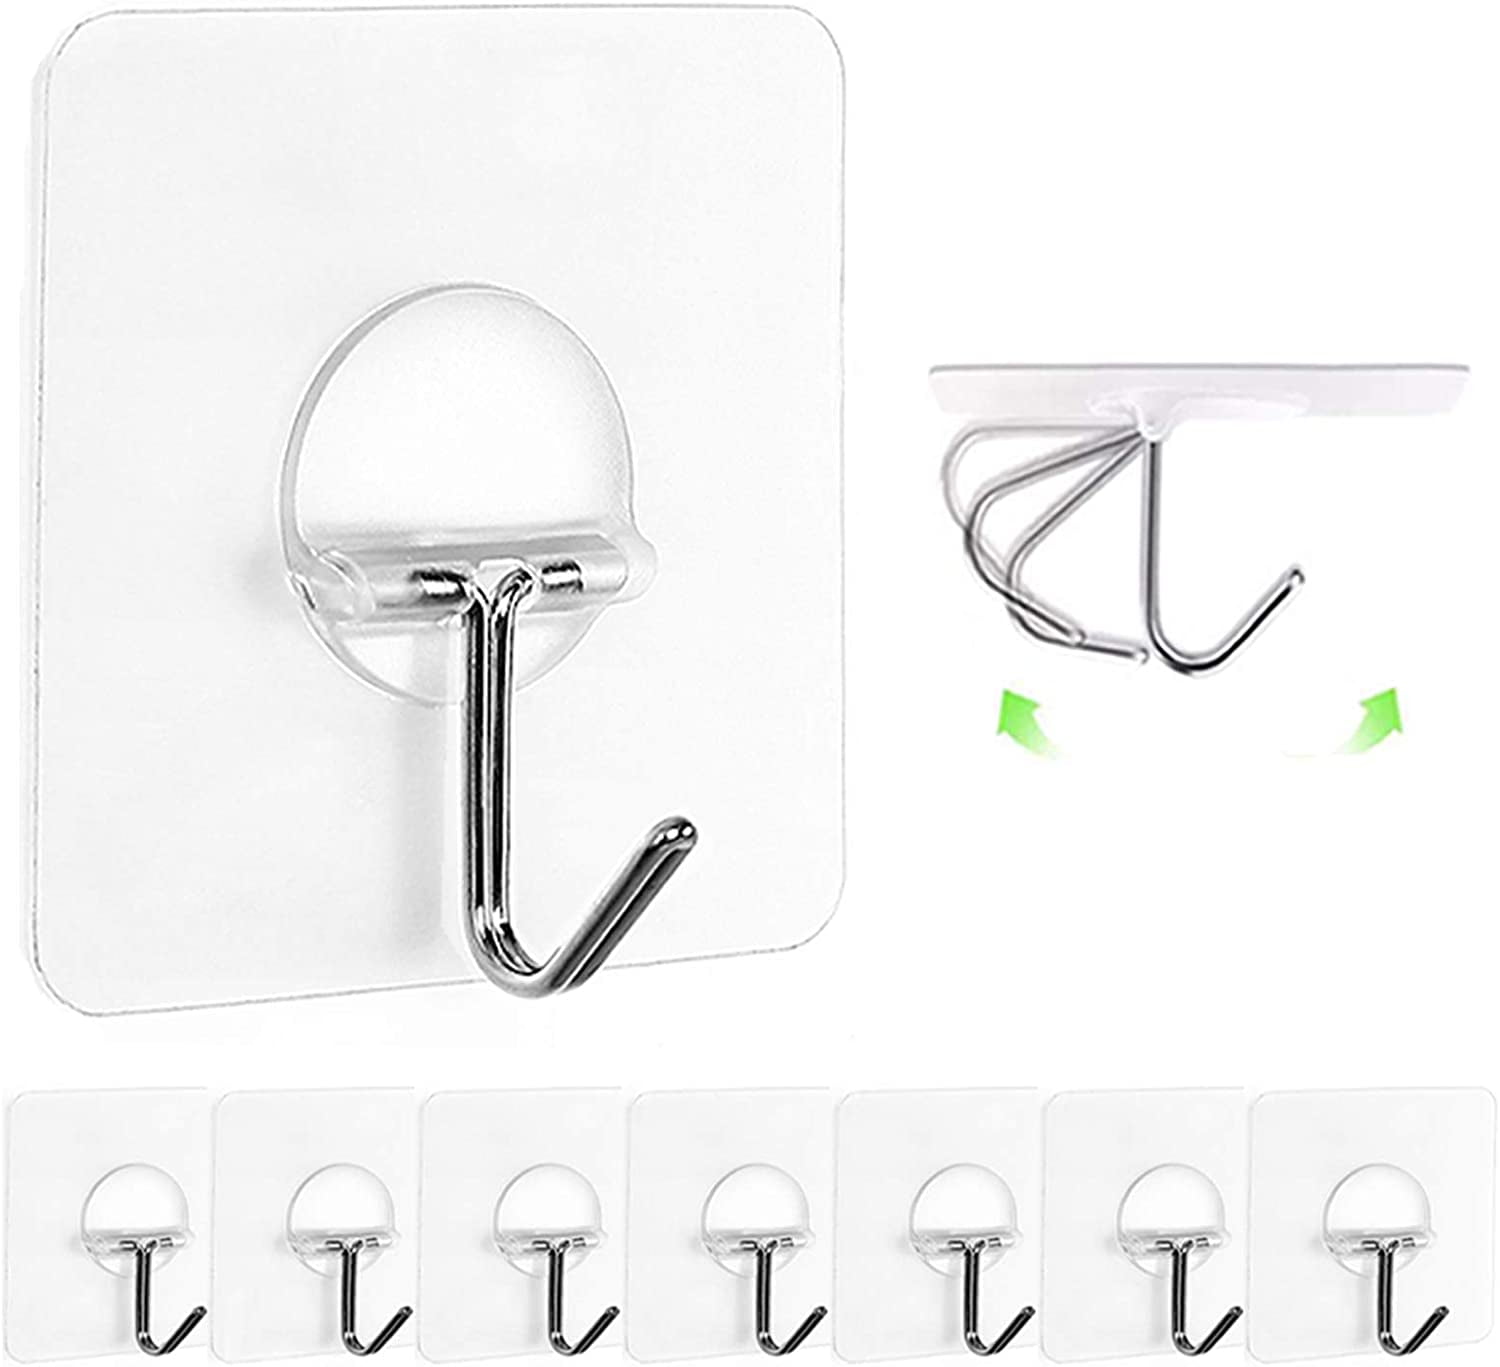 3PCS Rotation Hooks Nail Free Traceless Clothes Hangers Towel Robe Hangers for